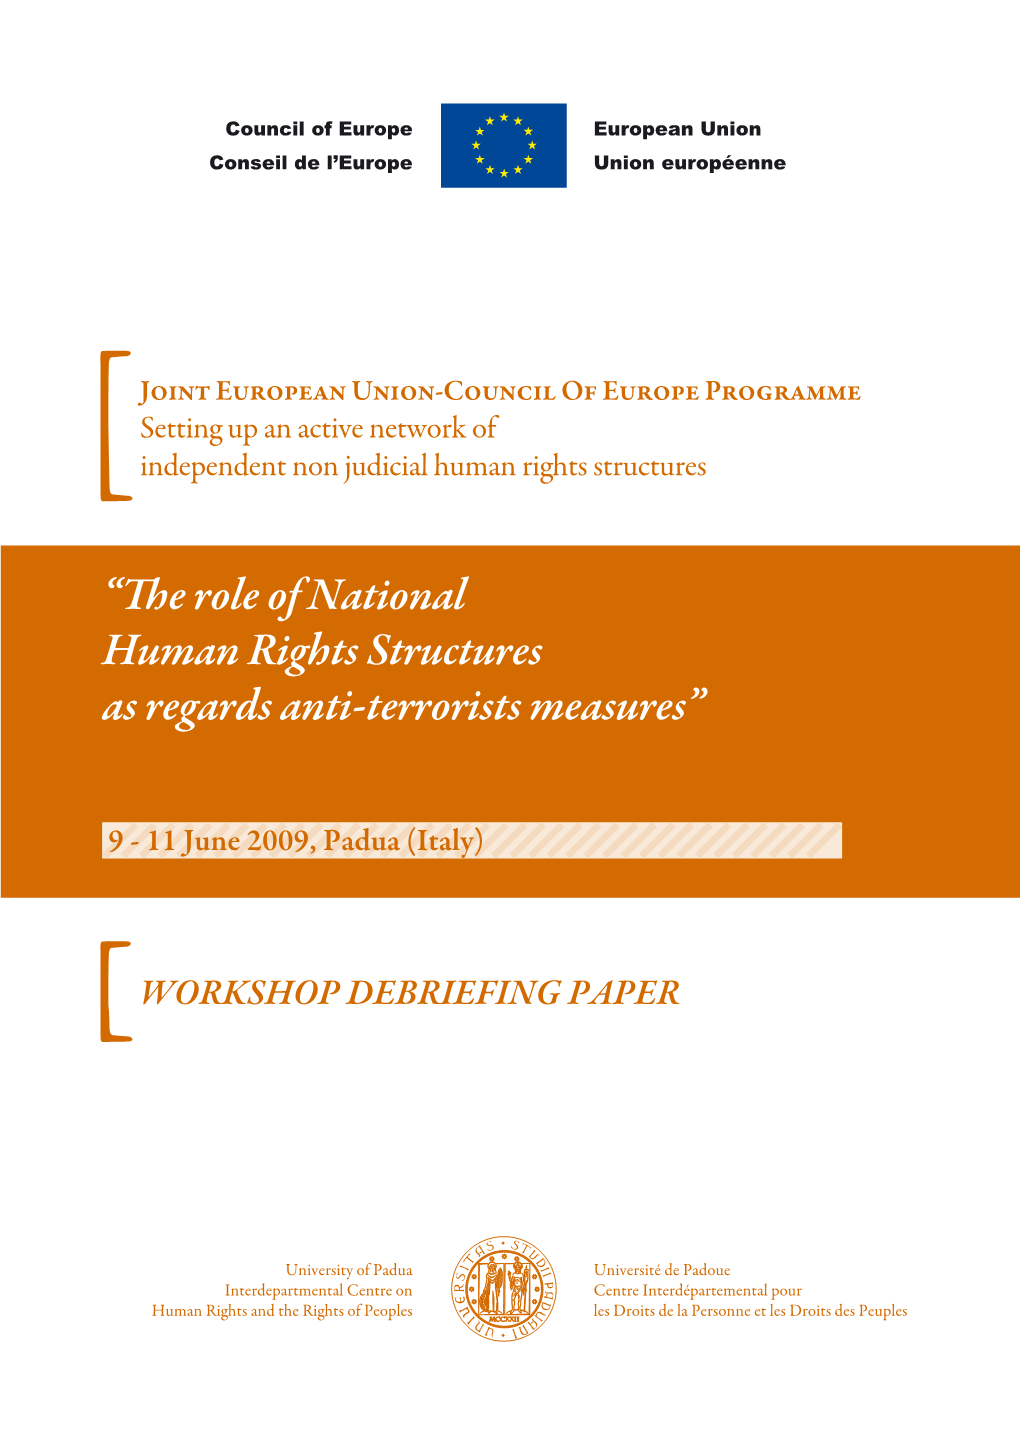 The Role of National Human Rights Structures As Regards Anti-Terrorists Measures” in Padua (Italy) on 9–11 June